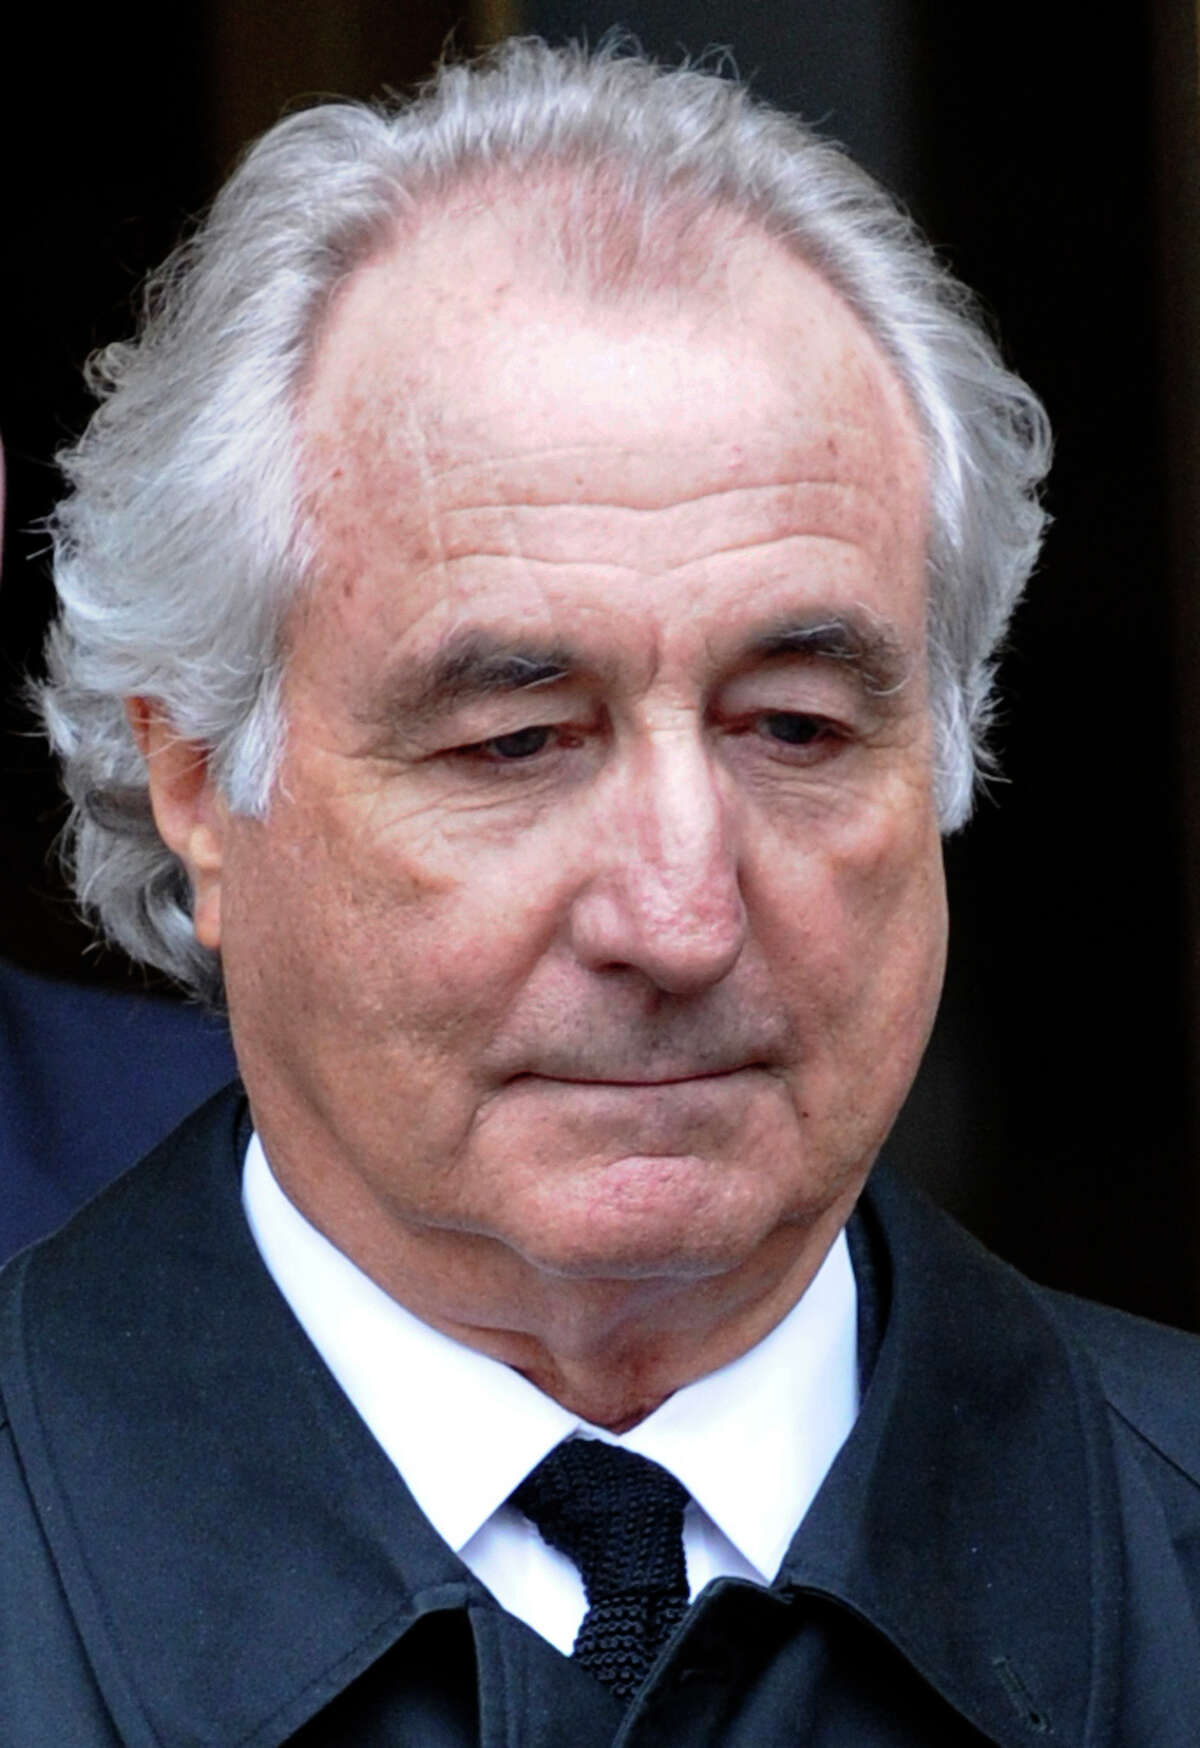 FILE - In this March 10, 2009 file photo, Bernard Madoff exits Manhattan federal court in New York. The trustee recovering money for Bernard Madoff's burned investors has reached a settlement with the estate of a Florida philanthropist and businessman who made billions of dollars off the fraud. Court-appointed trustee Irving Picard planned an announcement Friday in Manhattan about the estate of Jeffry Picower, who drowned after suffering a heart attack in the swimming pool of his Palm Beach, Fla., mansion on Oct. 25, 2009. (AP Photo/Louis Lanzano, file)